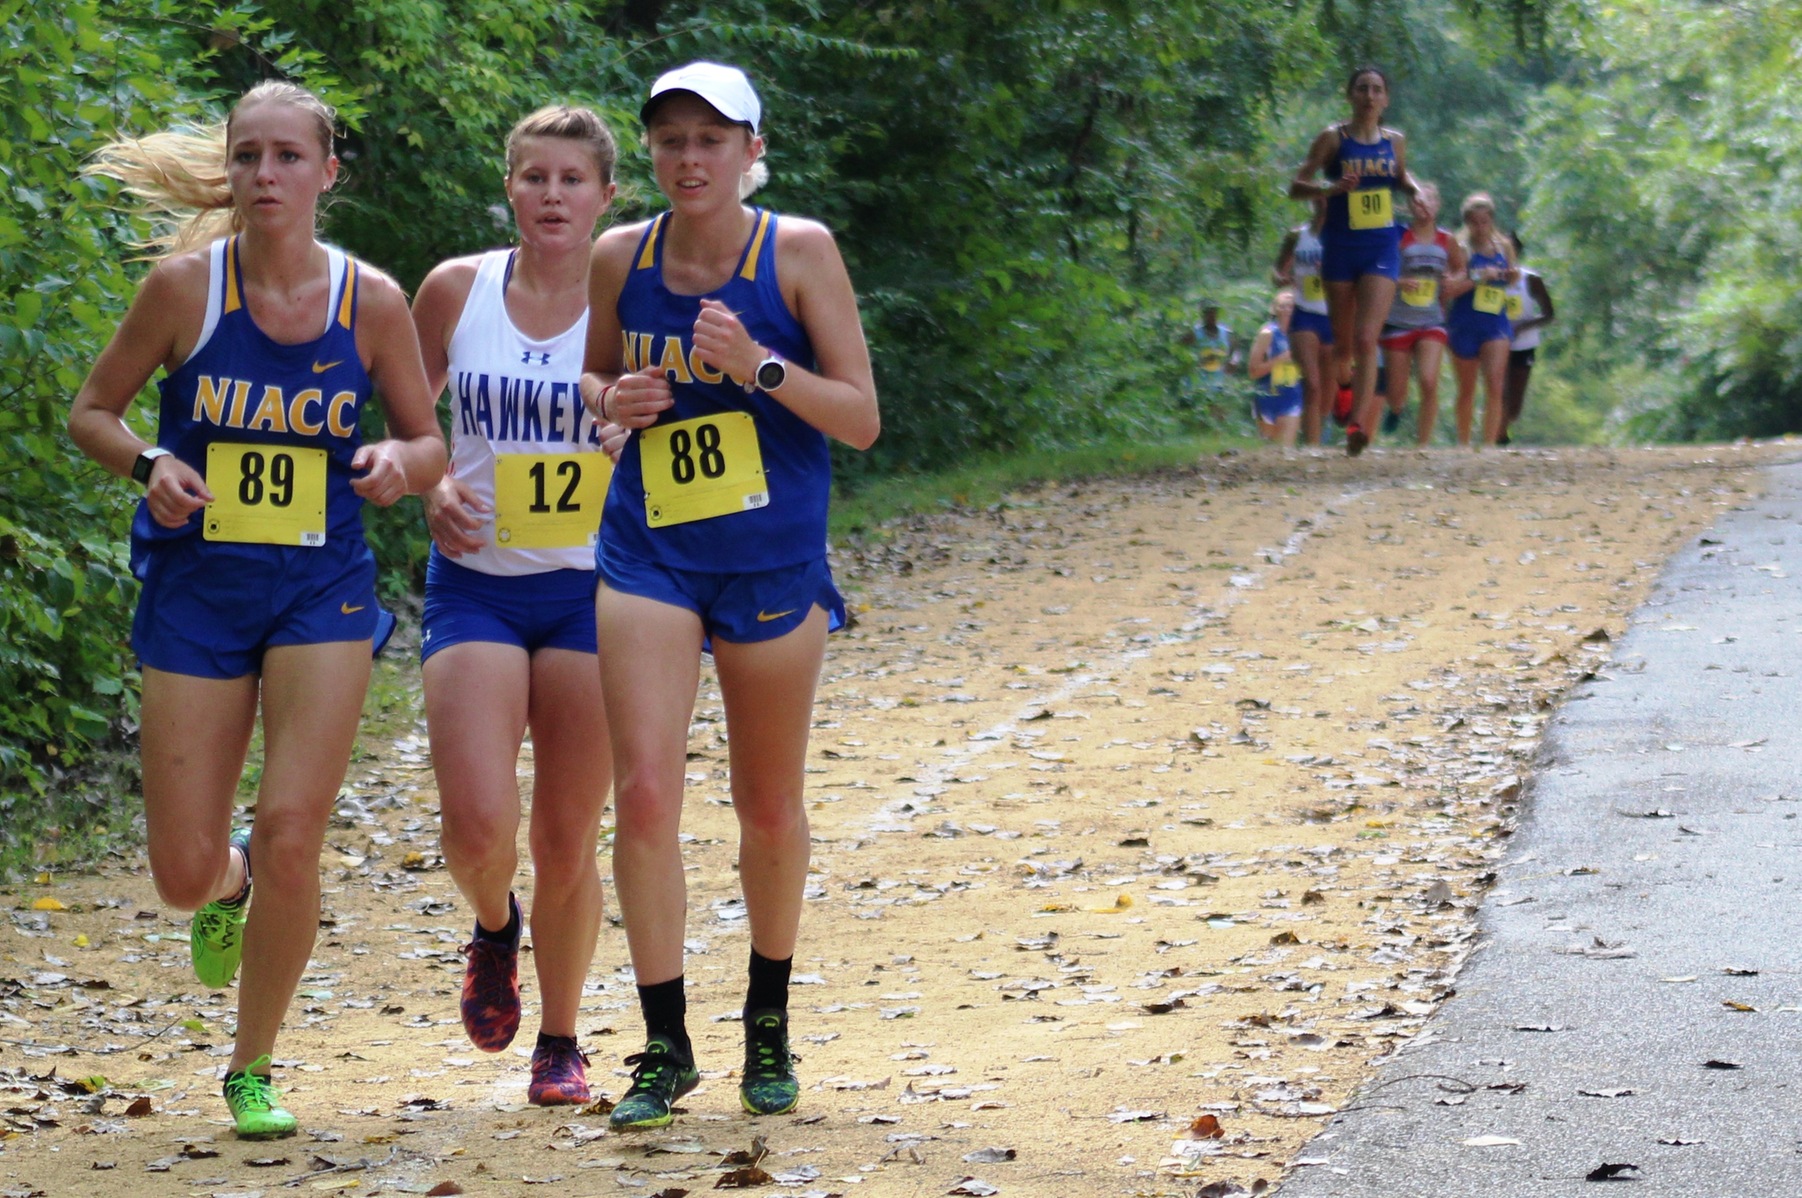 NIACC's Cecelia Hemsworth and Julia Dunlavey run at the regiona time trial in Davenport in August.